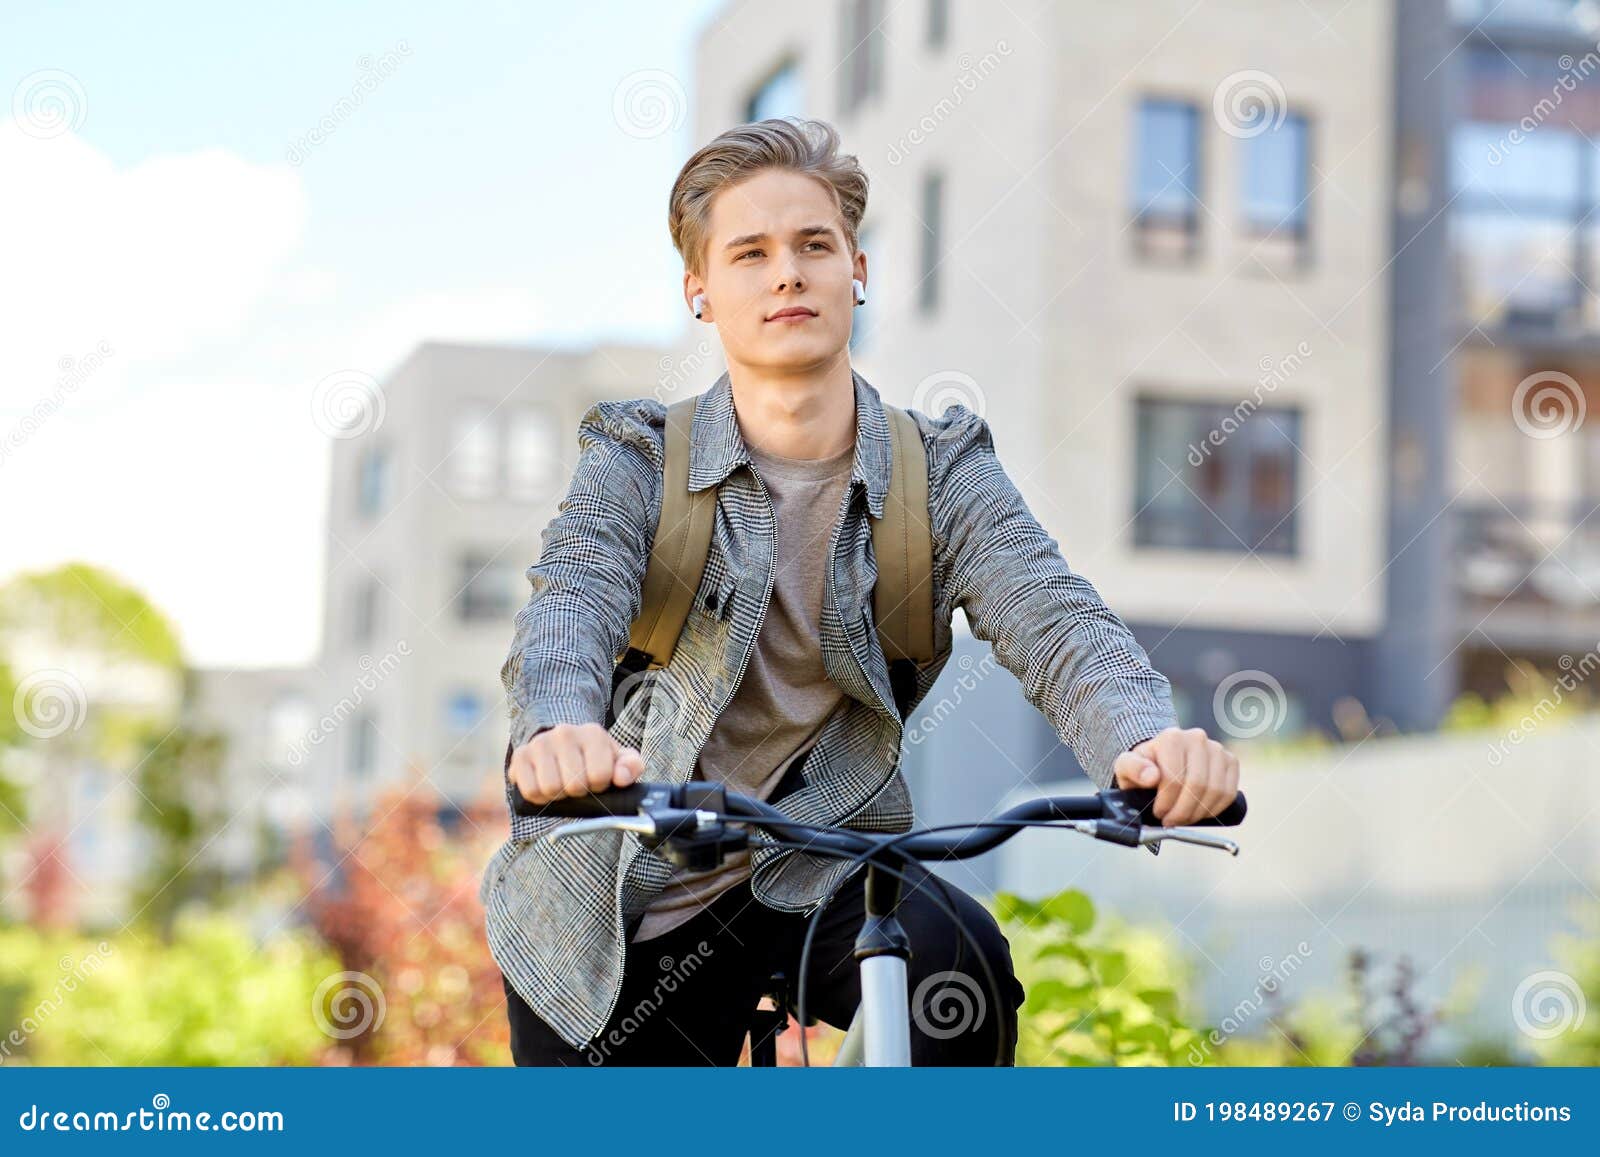 Student Boy with Bag and Earphones Riding Bicycle Stock Image - Image ...